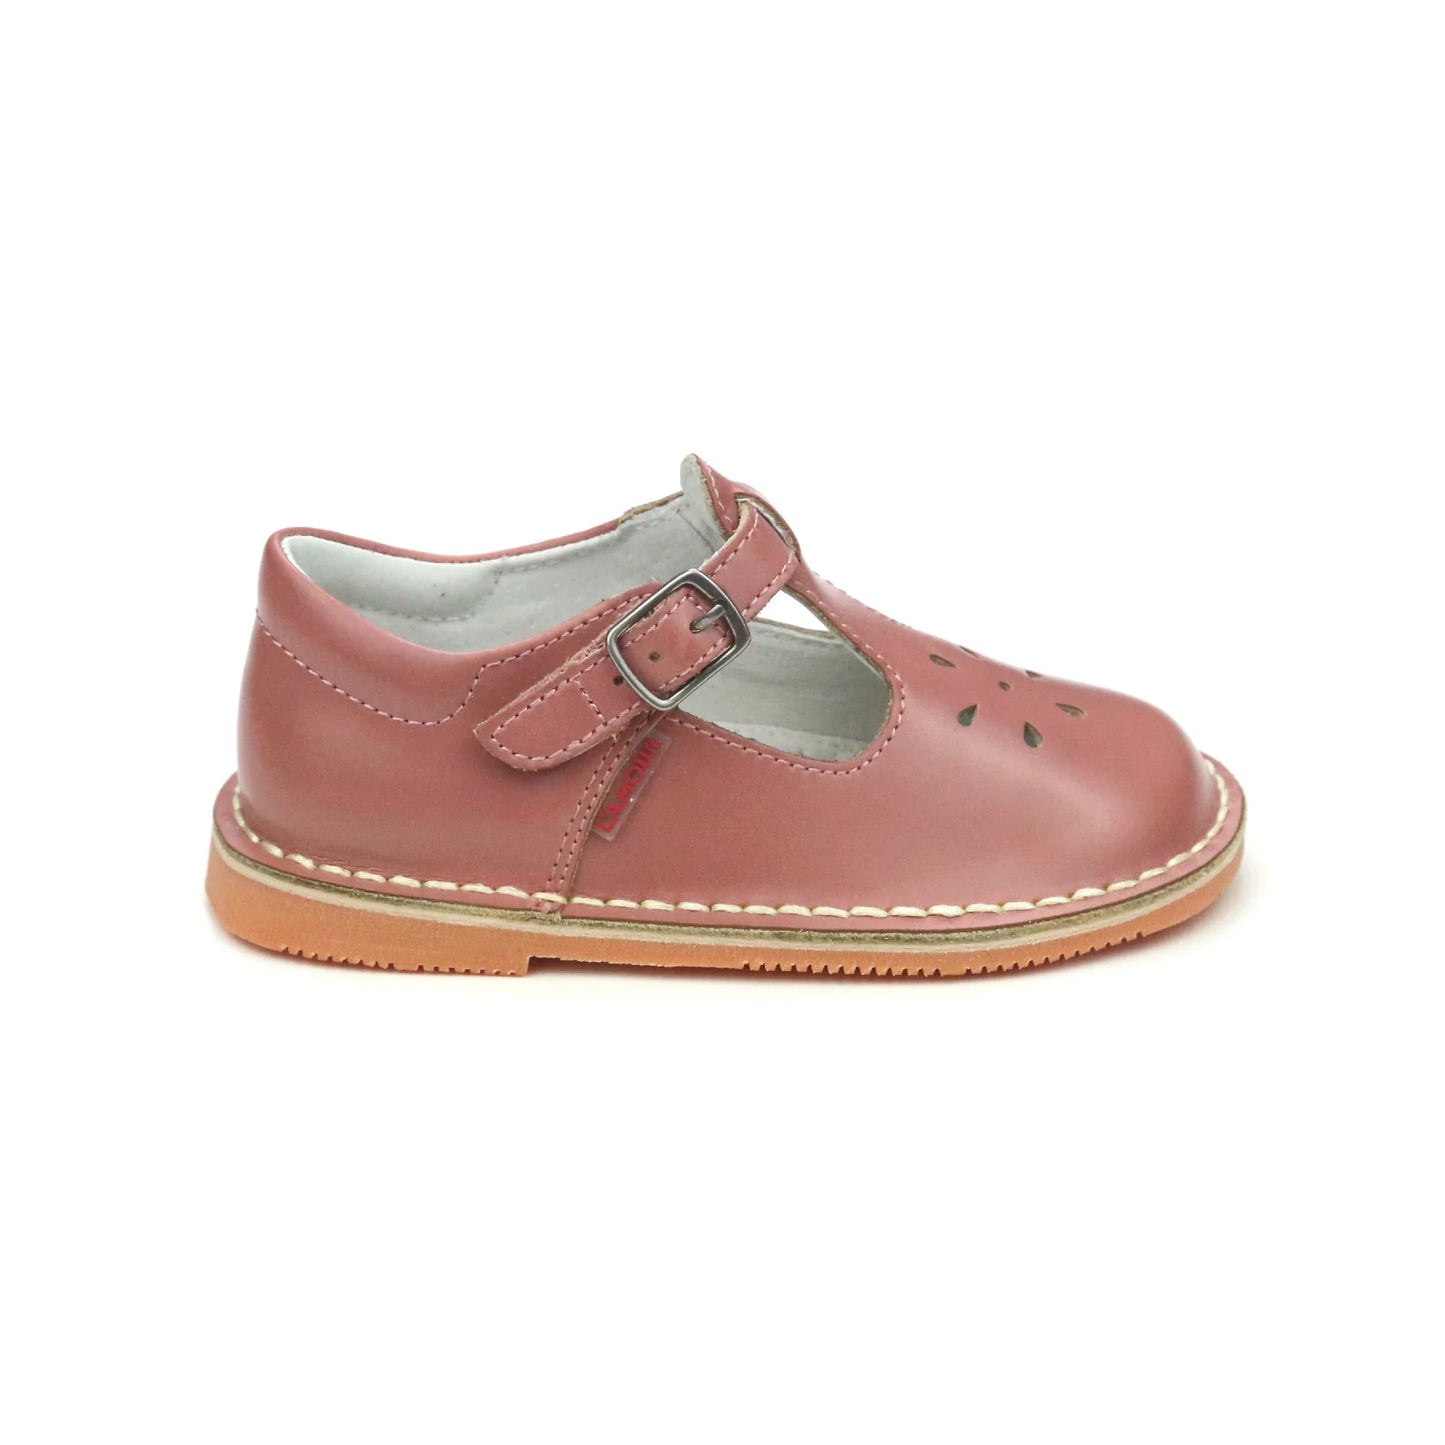 L'Amour Joy Waxed Leather T-Strap Mary Jane